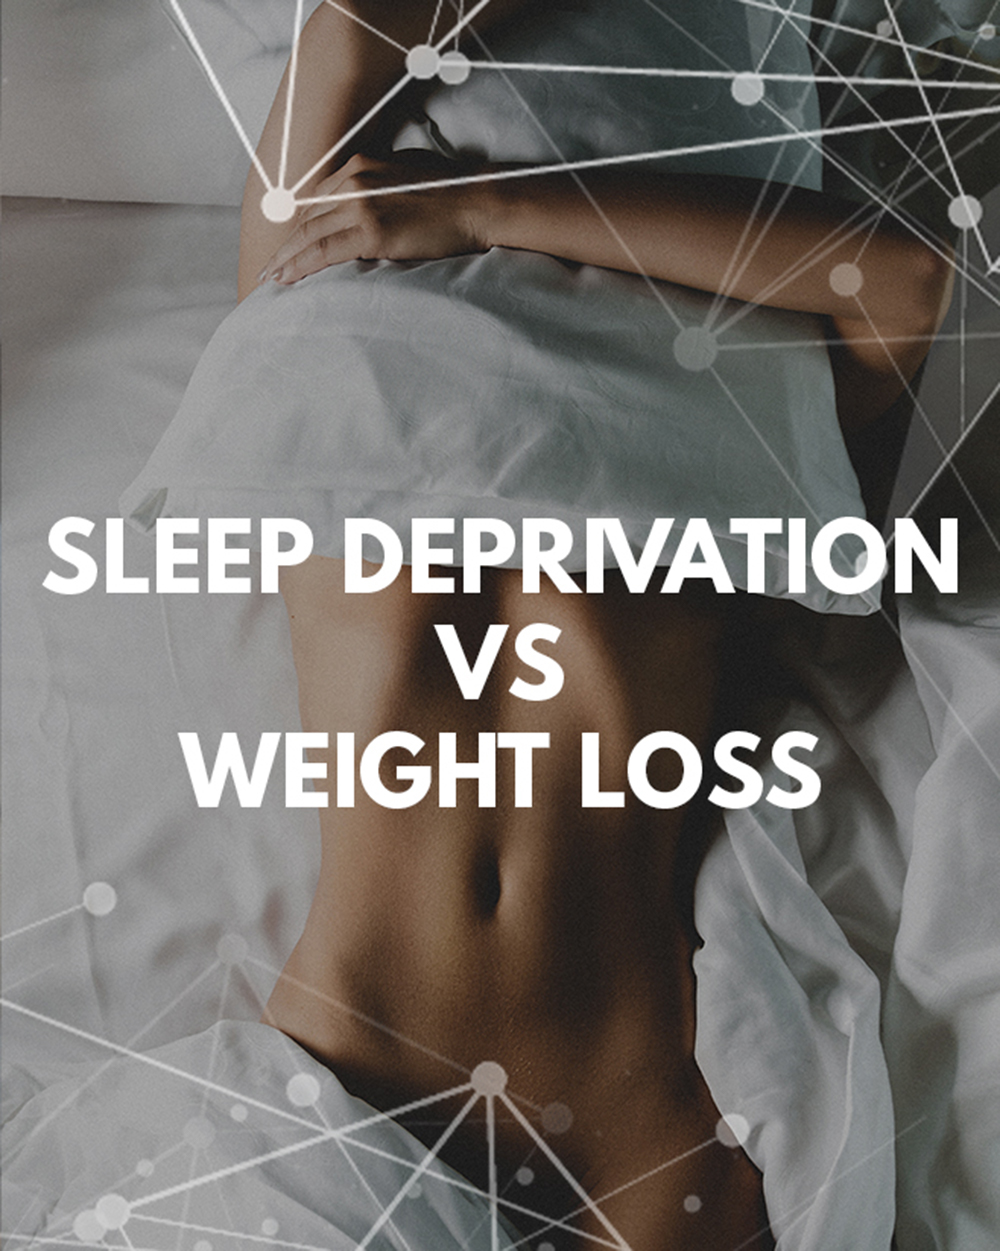 sleep deprivation vs weight loss, 2, weight loss peptides, weight loss tips, Peptides Direct, RegenMed, buy peptides online australia